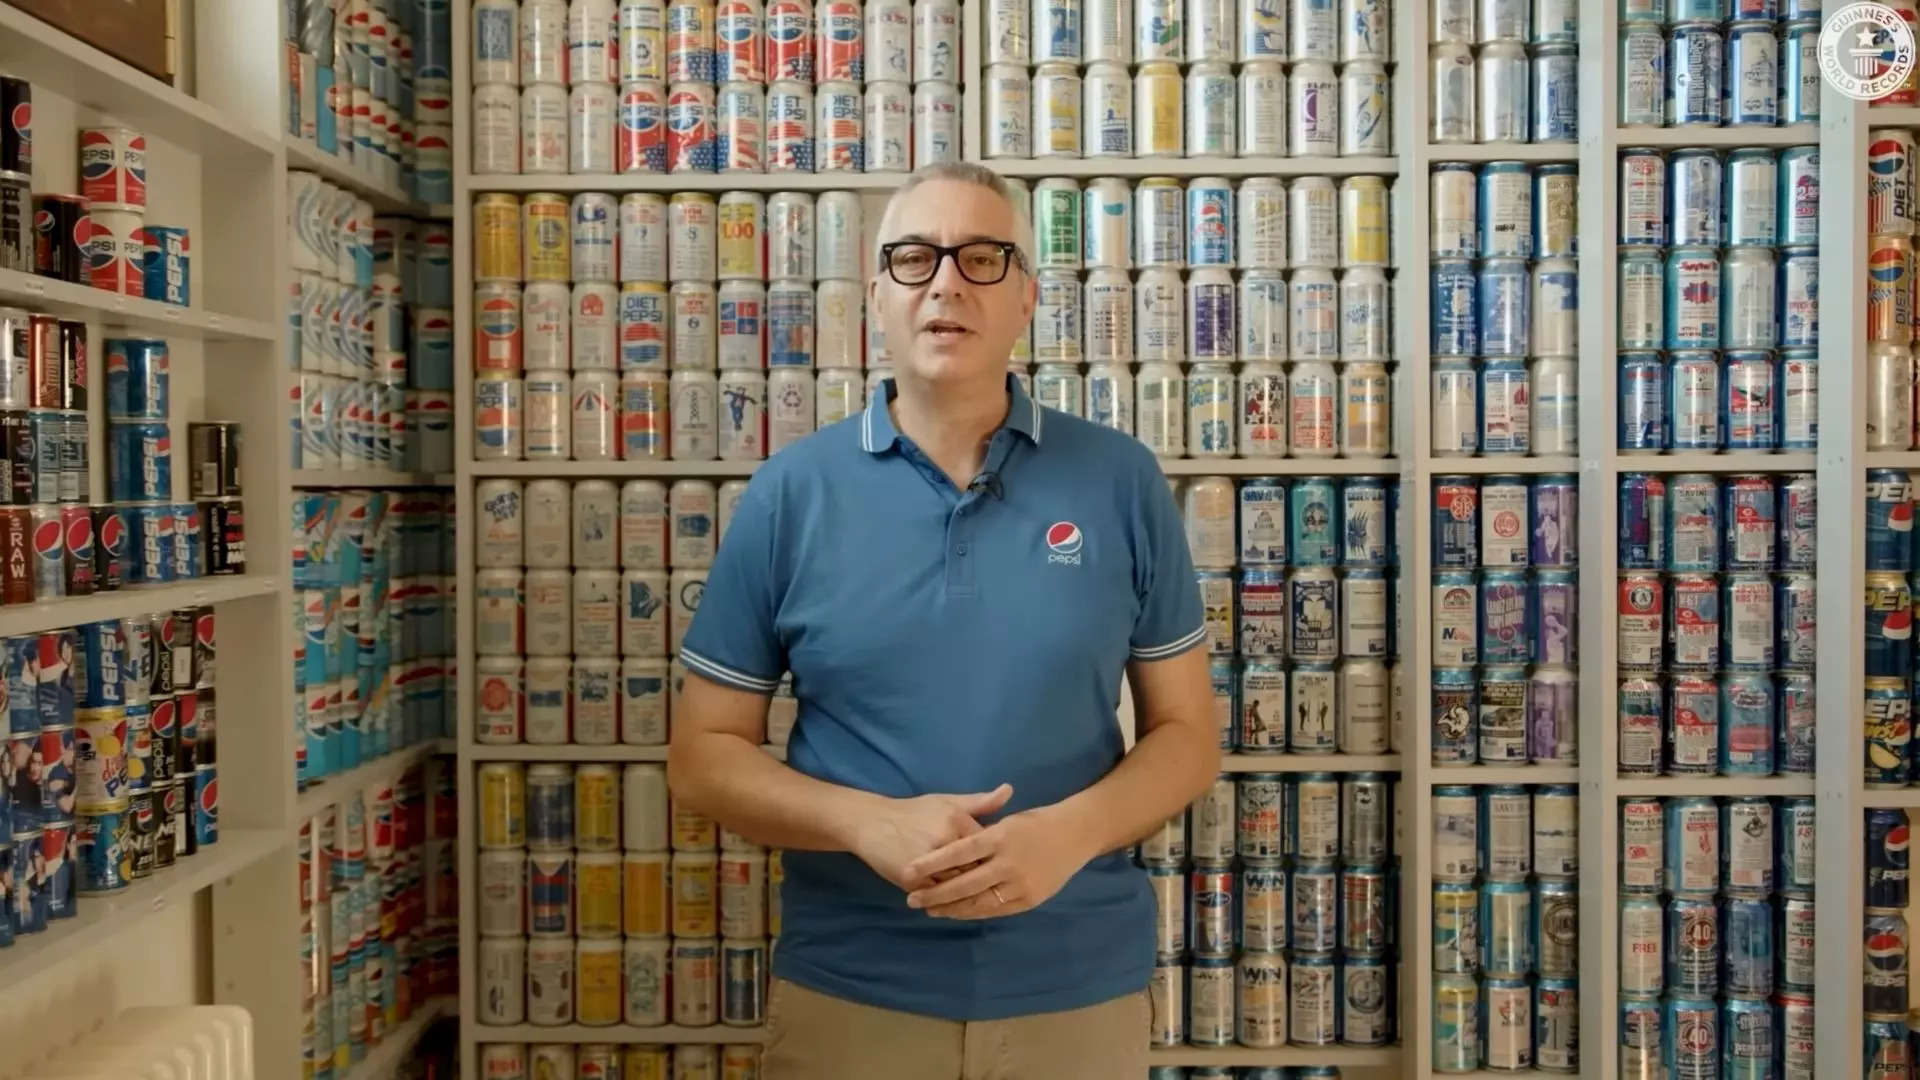 Italy Man Collects 12042 Pepsi Cans to Break His Own Guinness World Record for Largest Collection on Earth